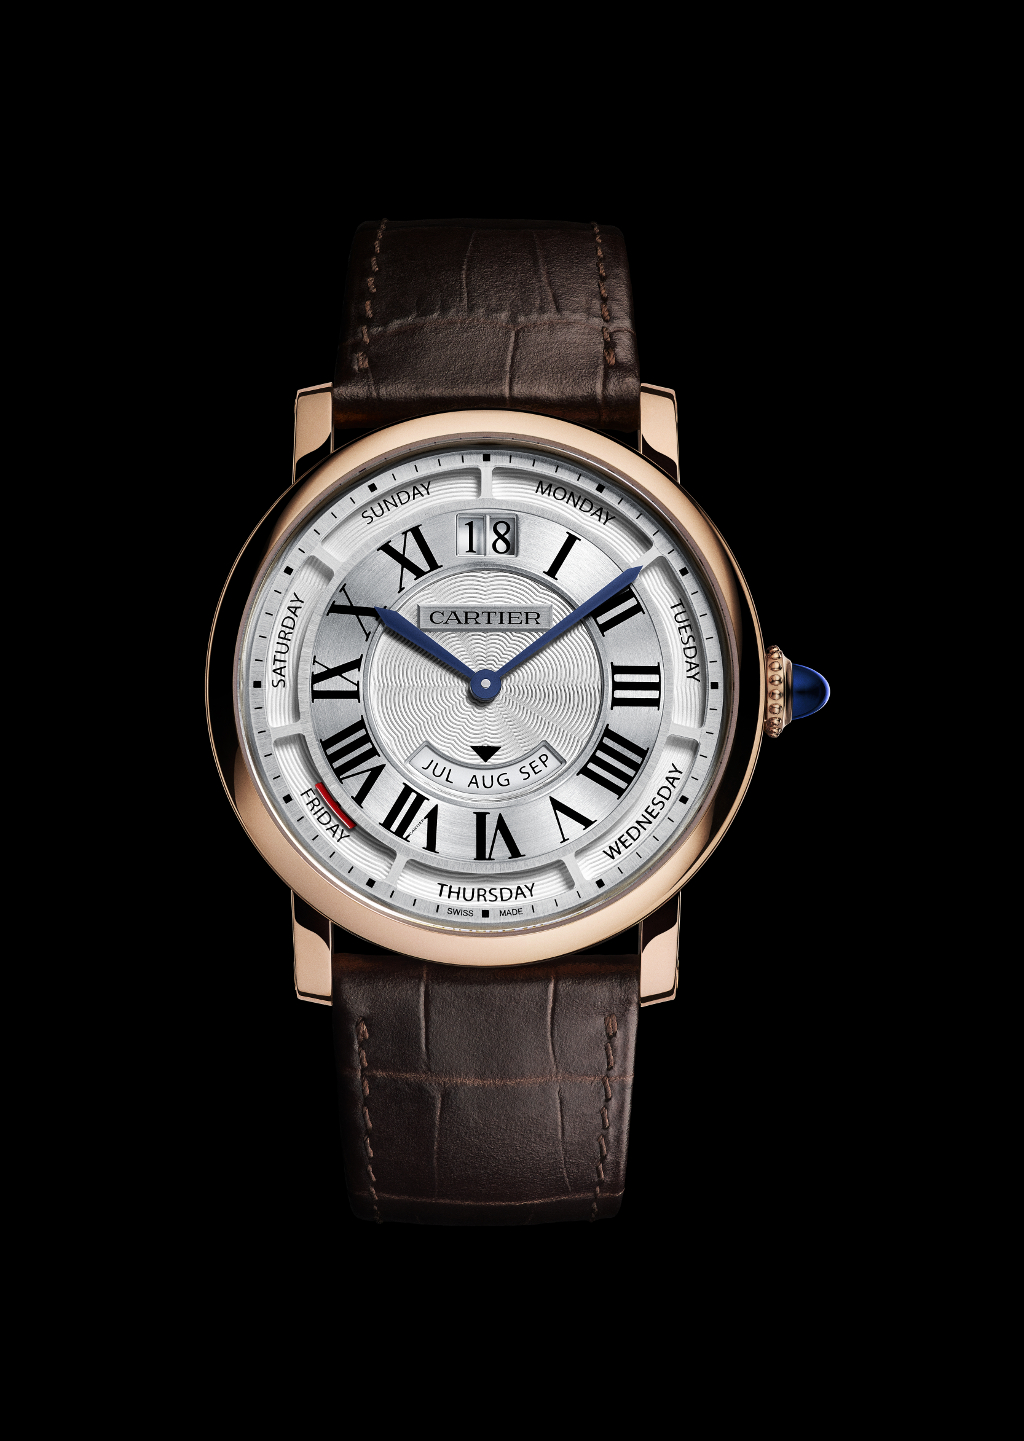 The Rotonde de Cartier Annual Calendar, this time in pink gold. 